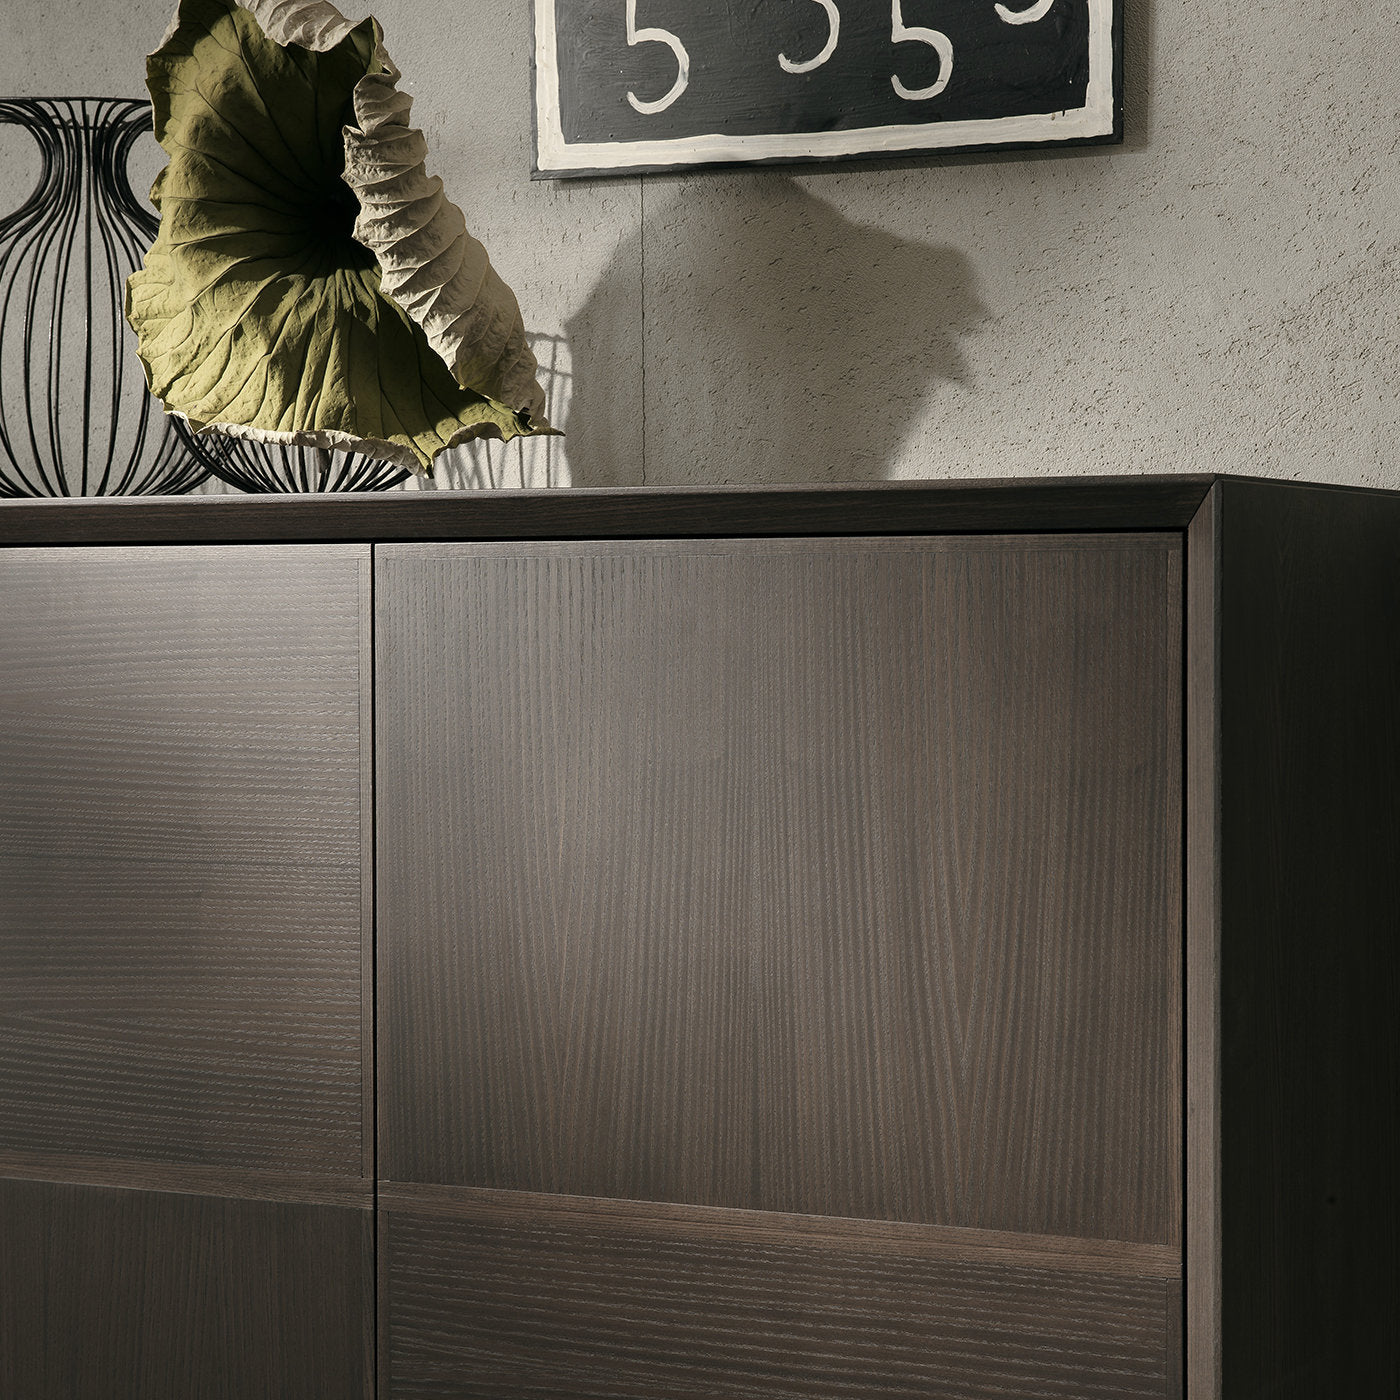 Flair Sideboard by Giuliano Cappelletti - Alternative view 2